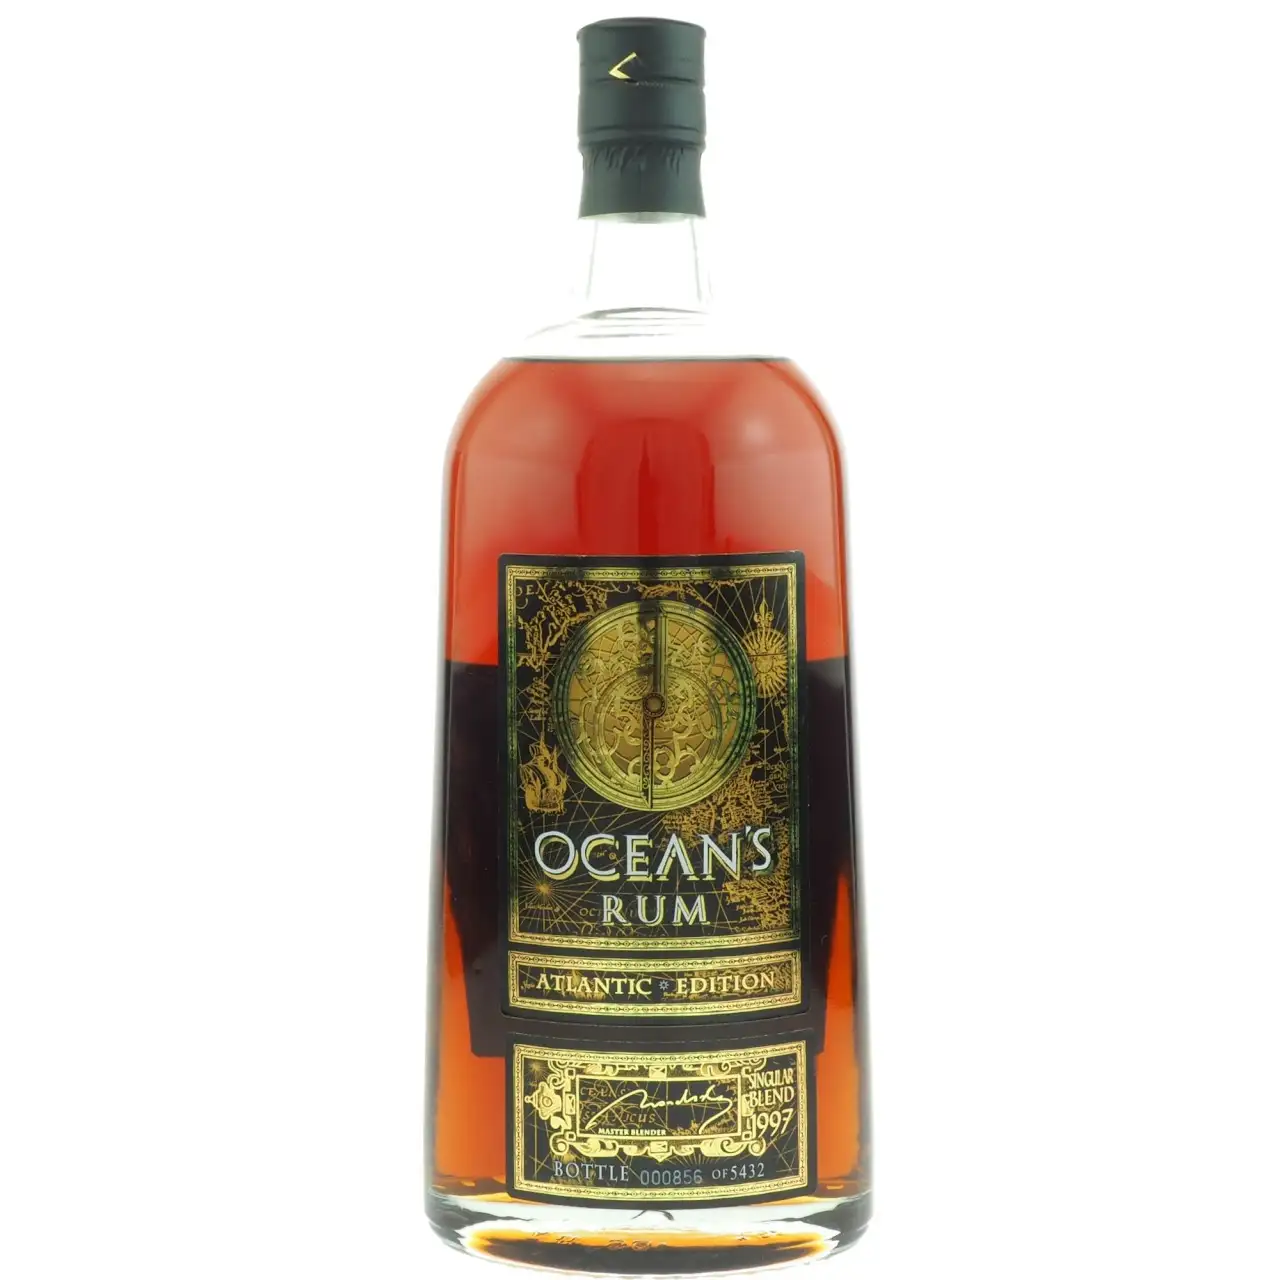 Image of the front of the bottle of the rum Ocean's Rum -  Atlantic Edition